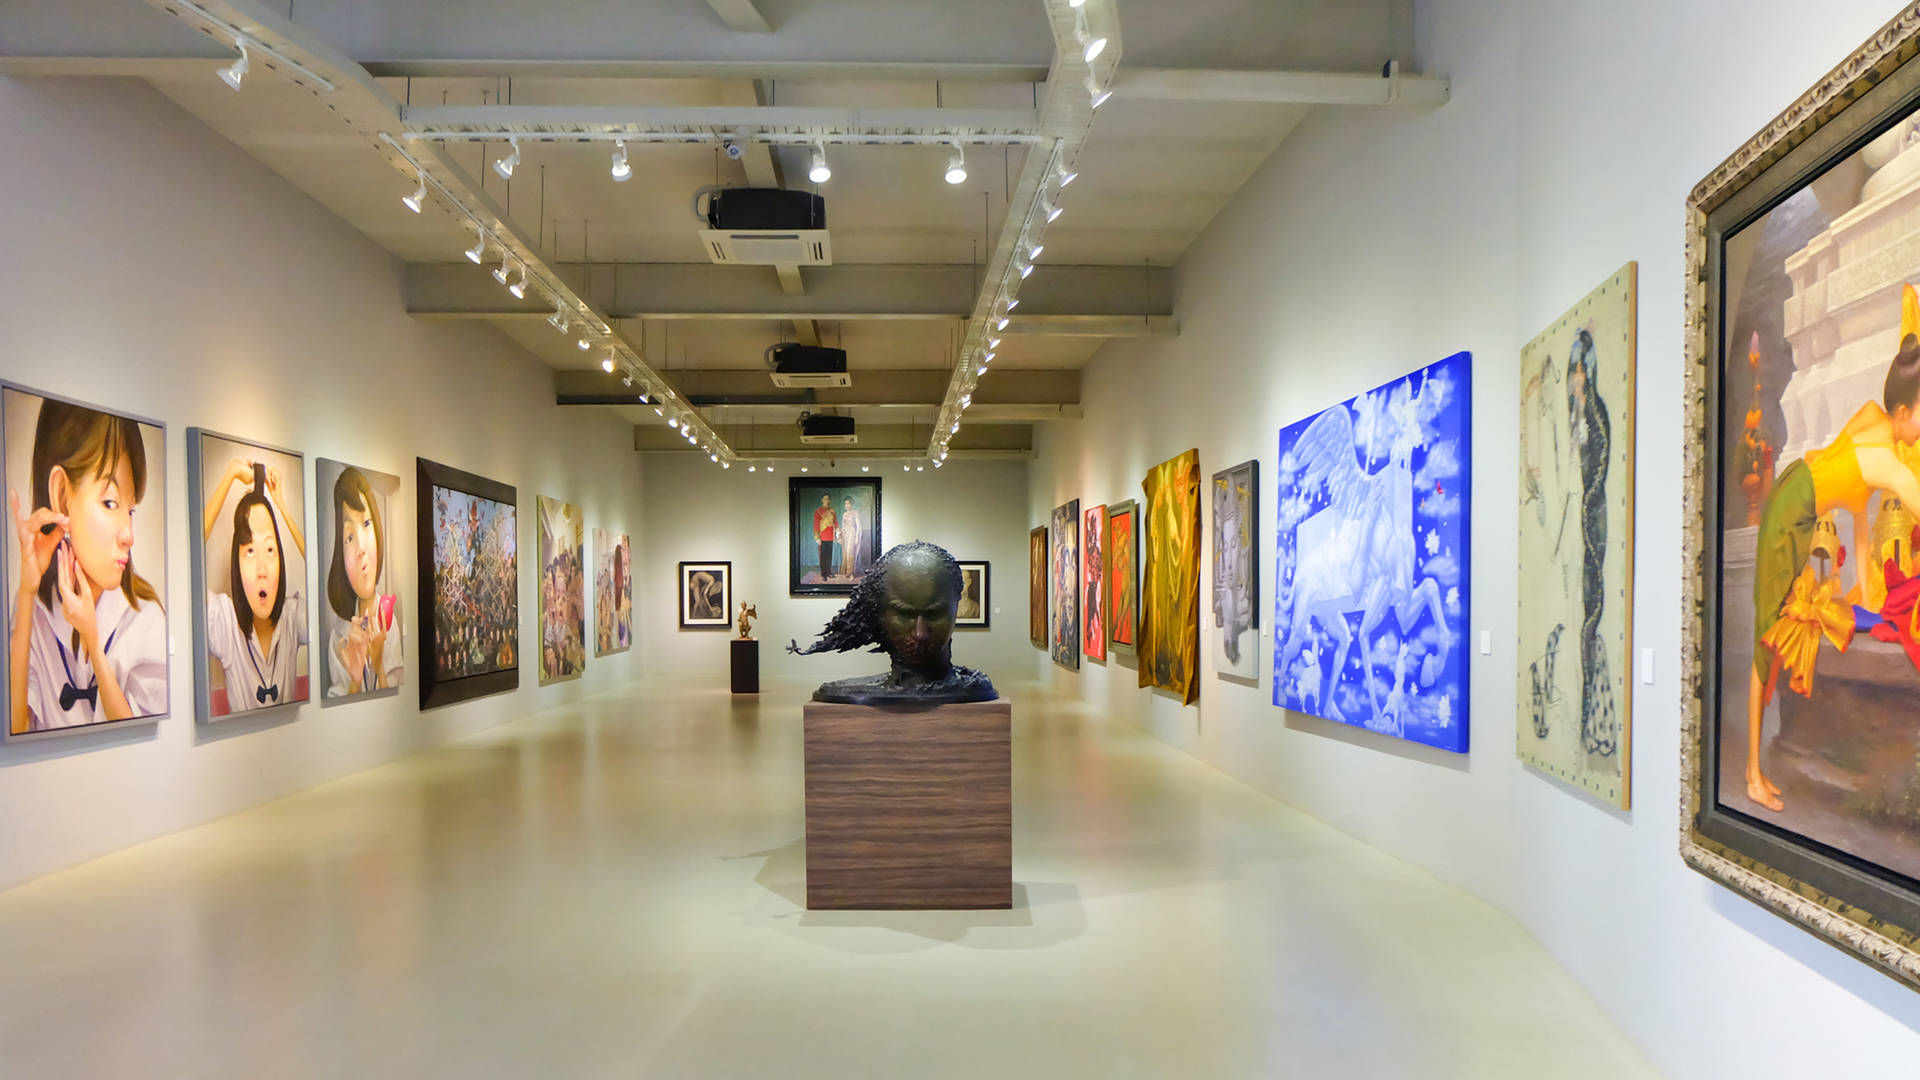 The interior of a modern art gallery